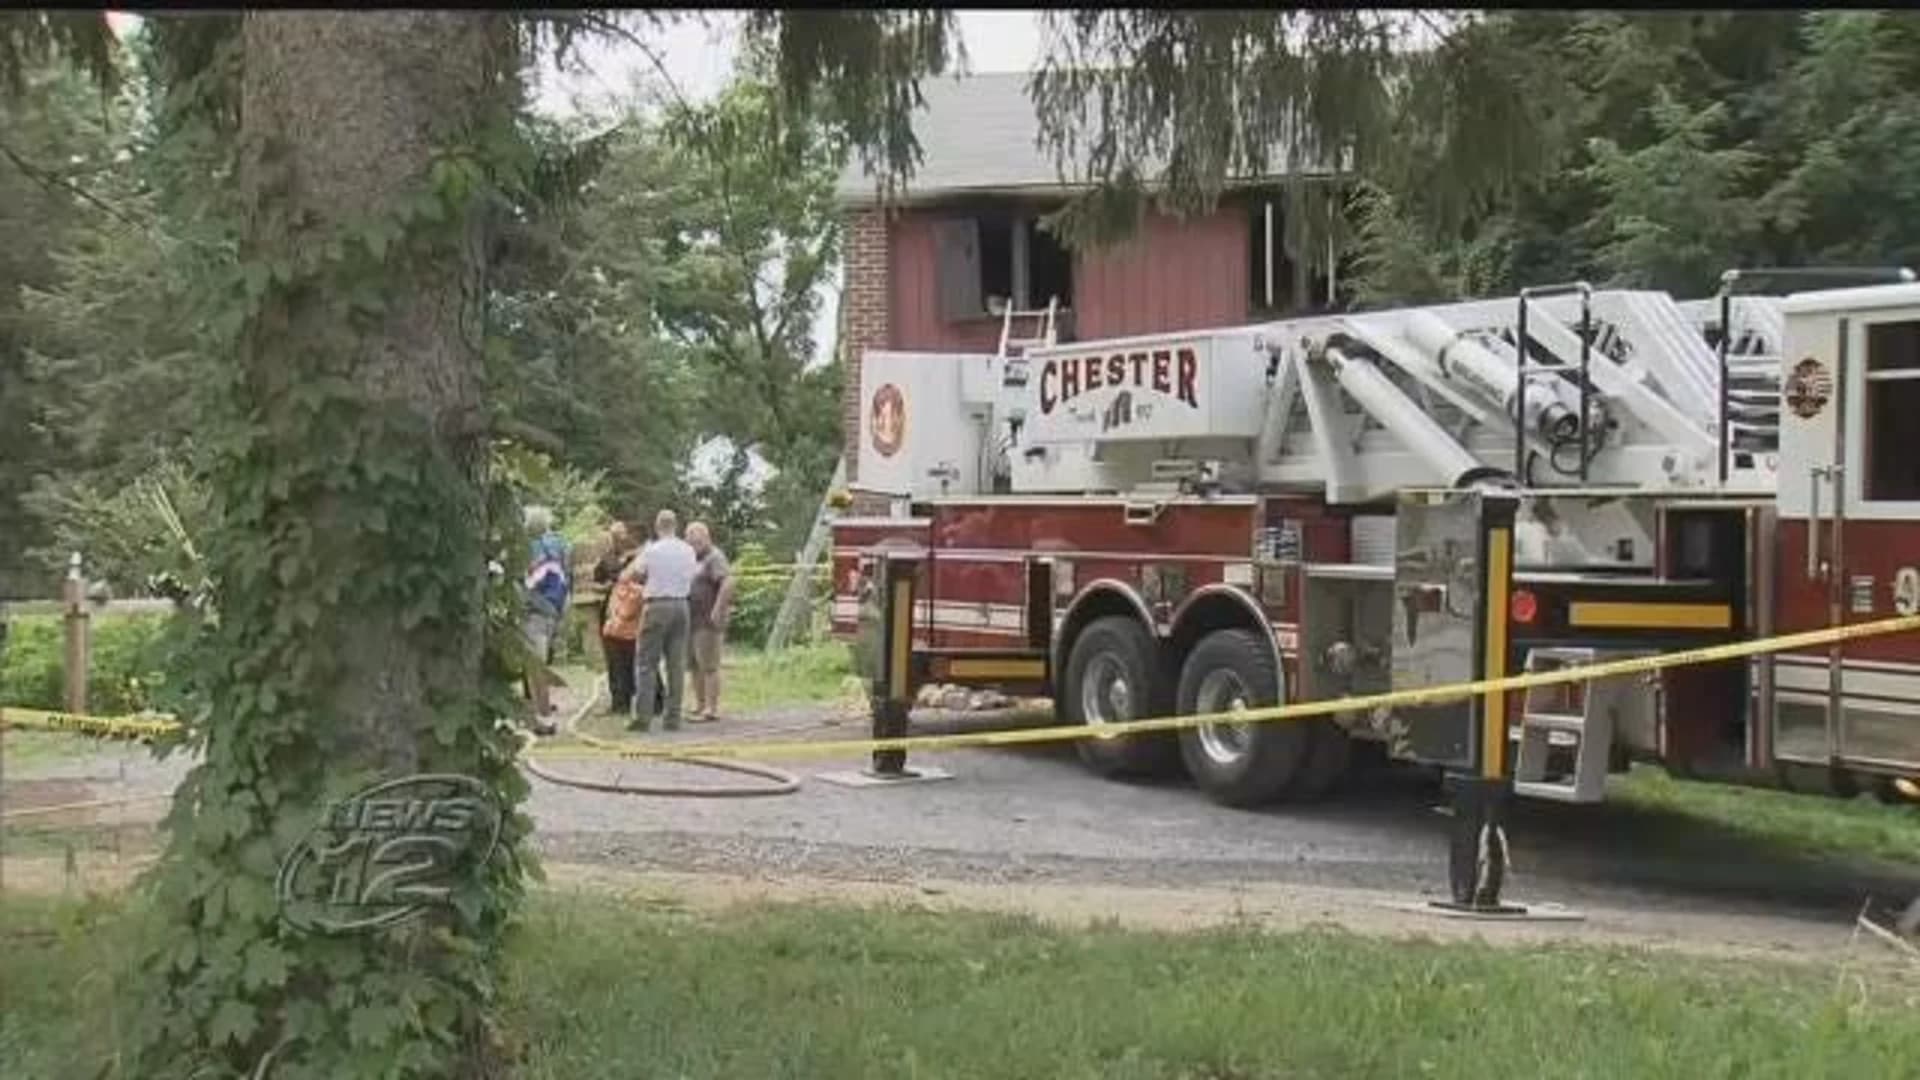 Officials: 1 killed in Chester apartment fire